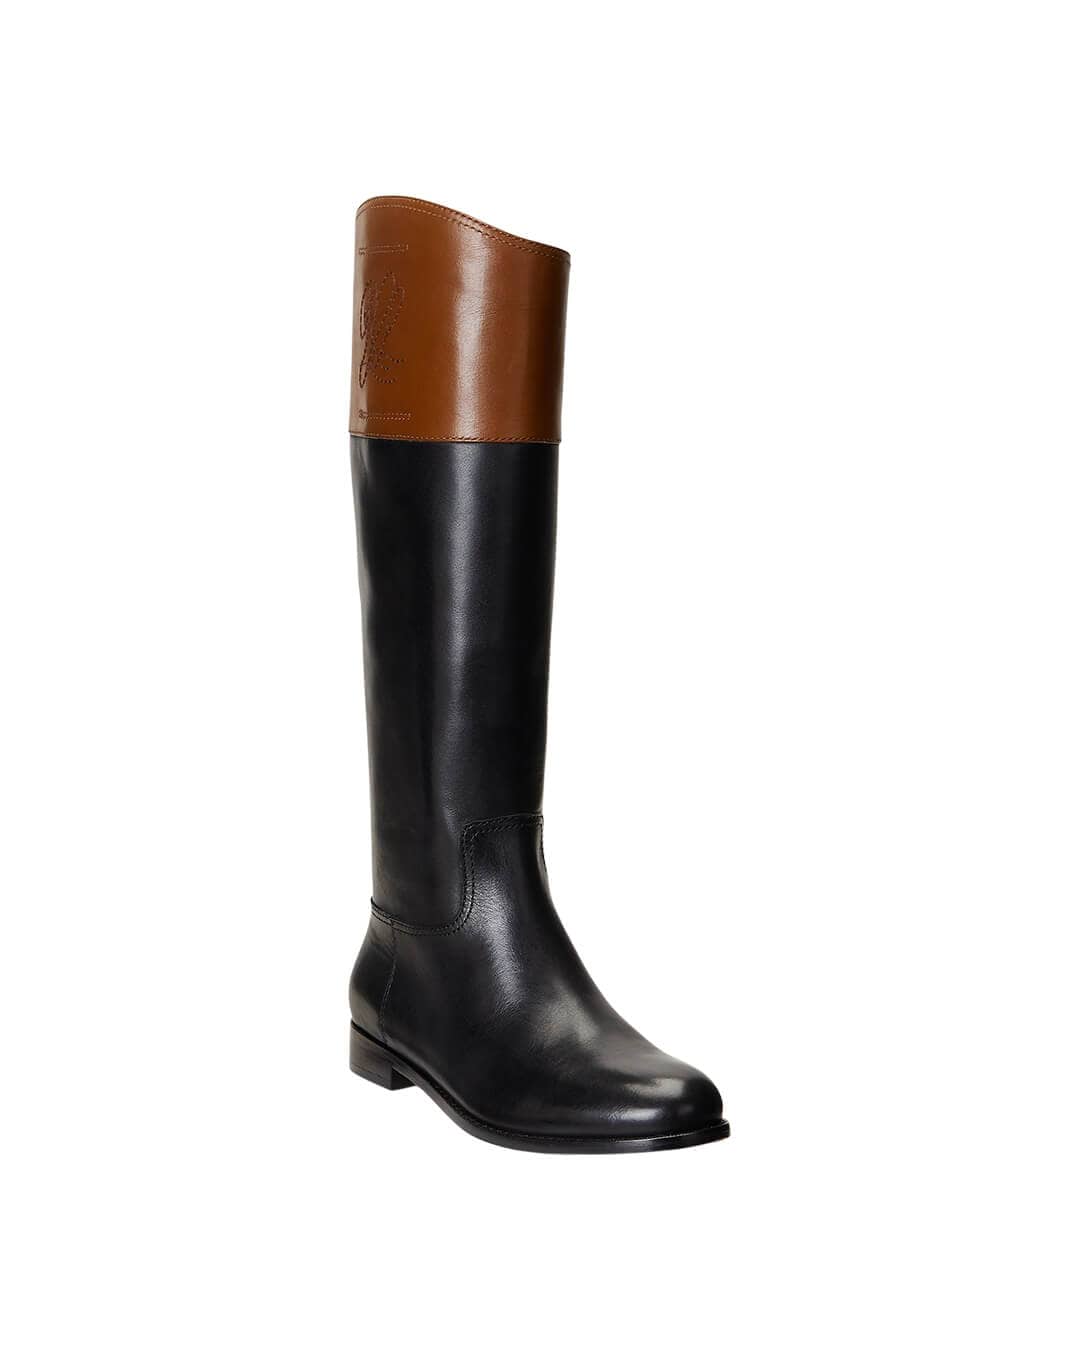 Lauren By Ralph Lauren Shoes JUSTINE-BOOTS-TALL BOOT BLACK/DEEP SADDLE TANAW23